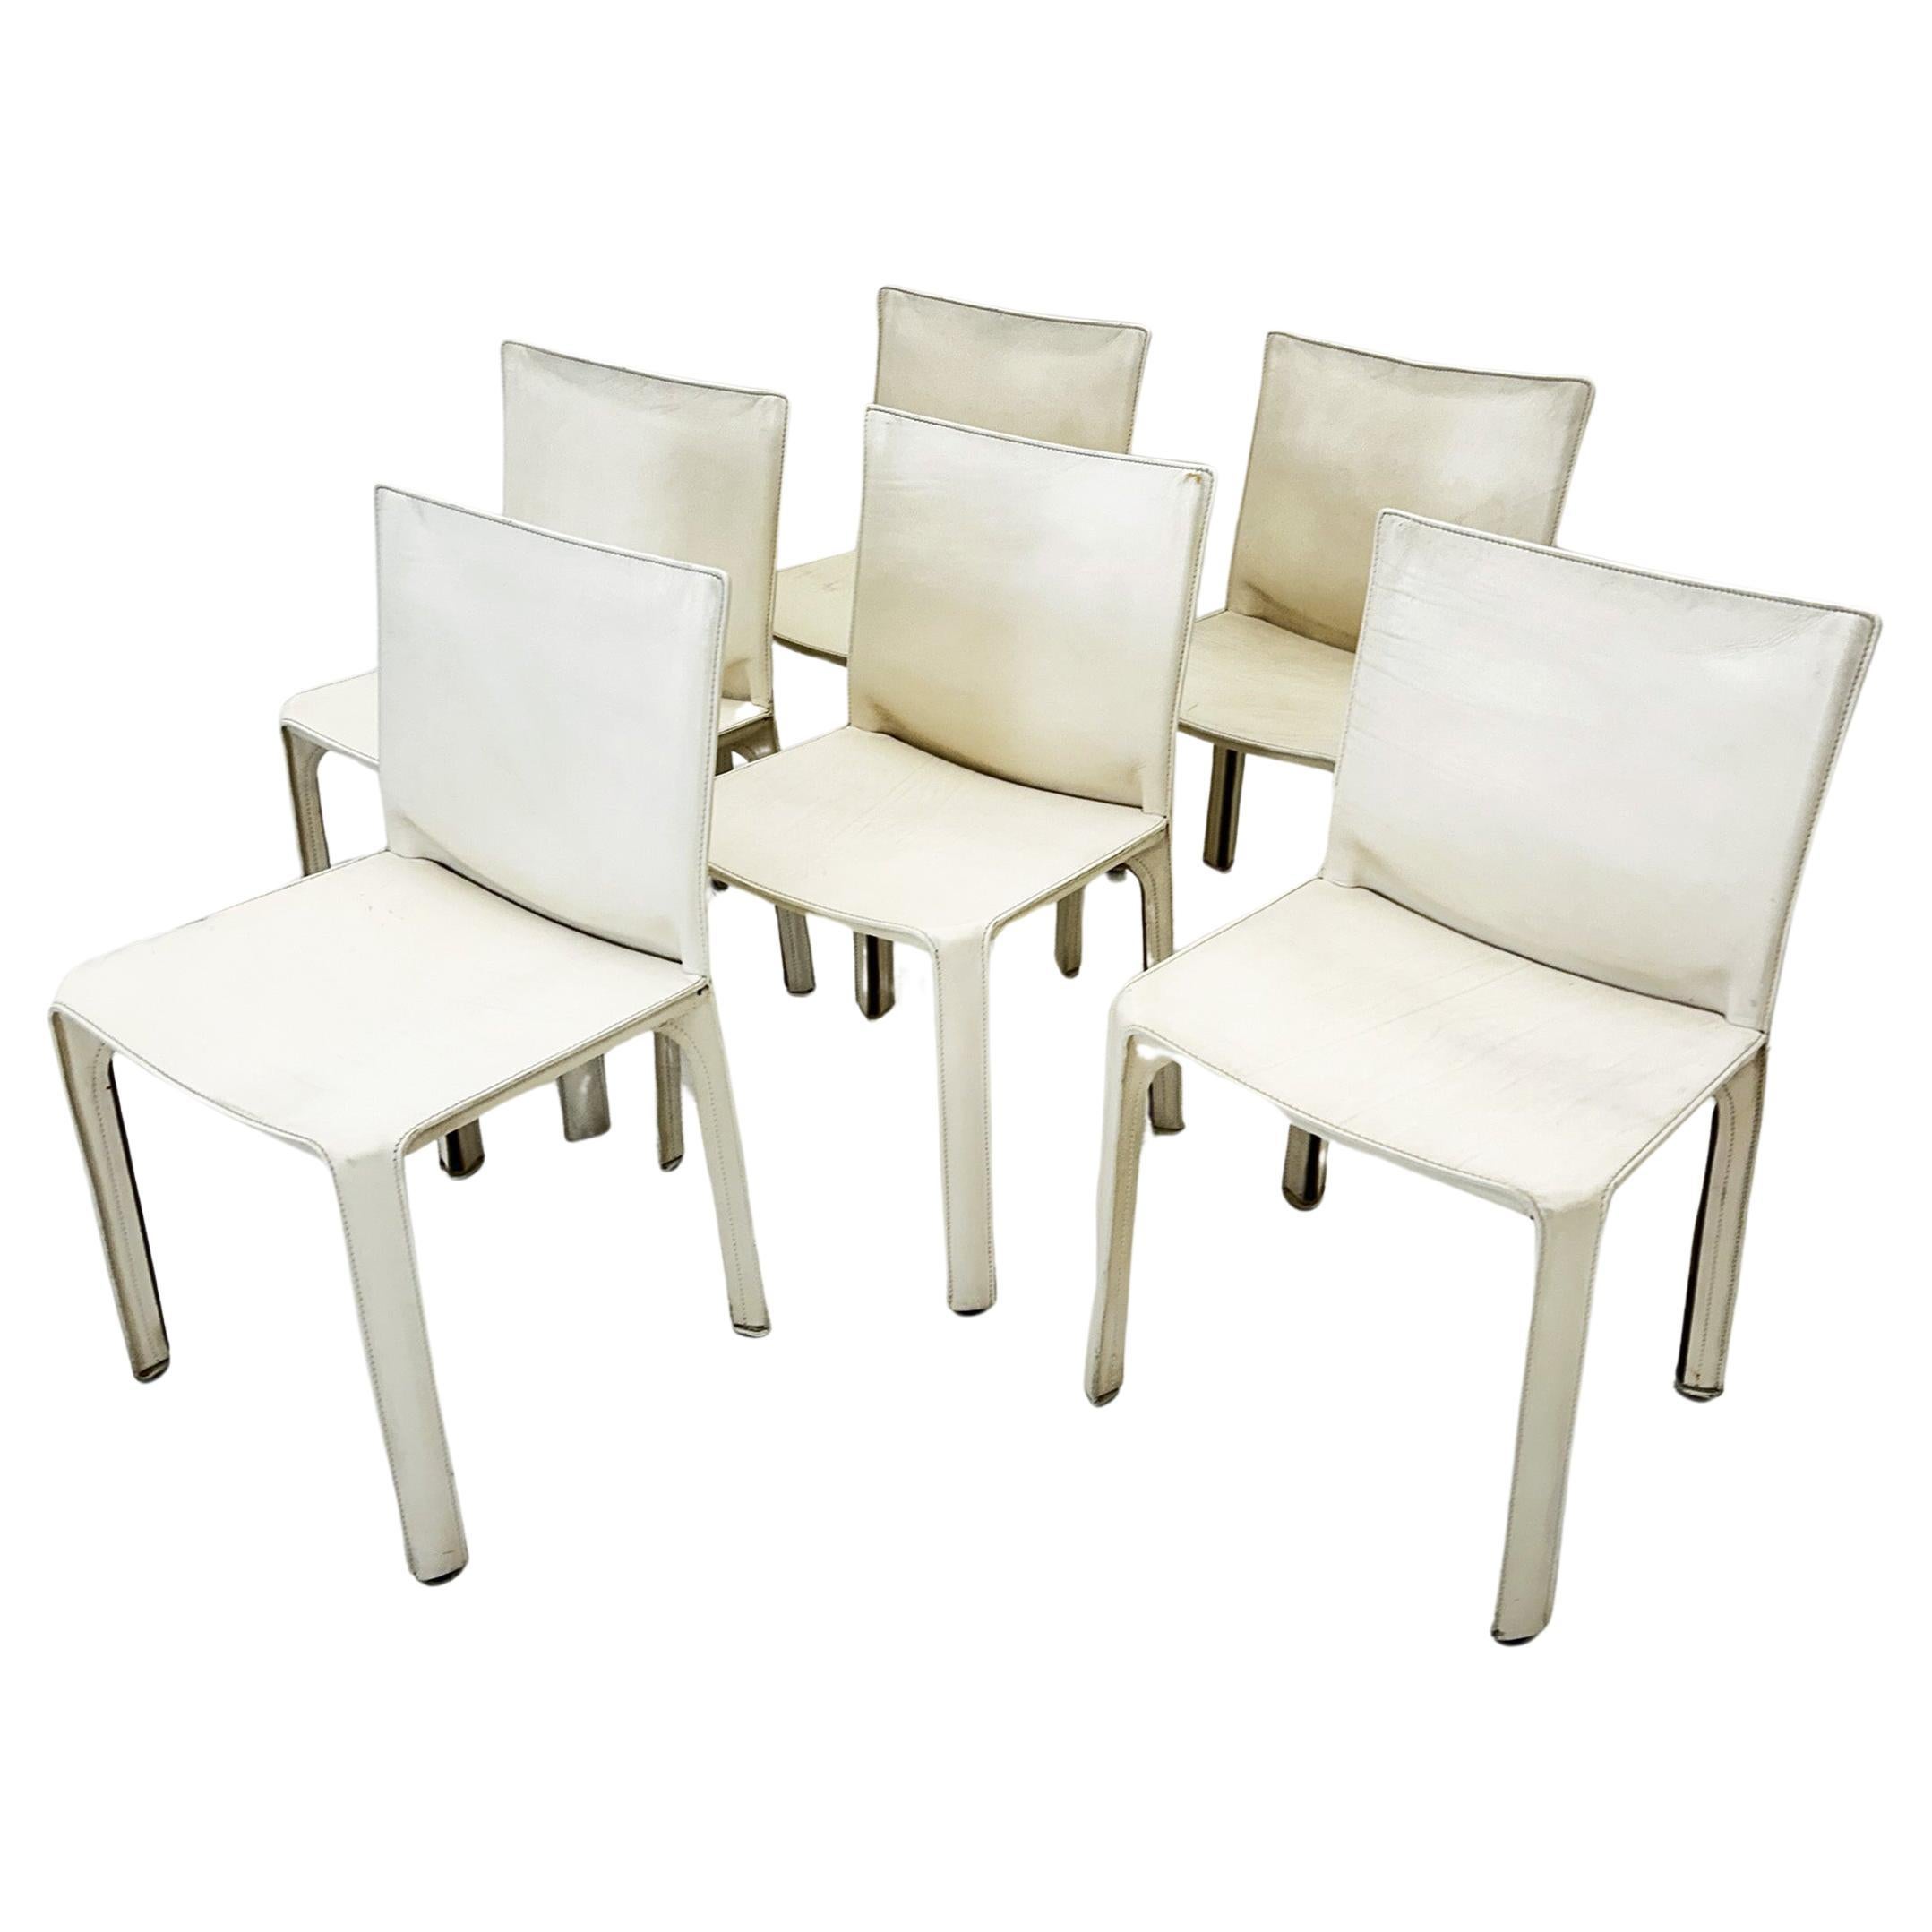 SIX Chairs 412 CAB- Cassina WHITE LEATHER For Sale